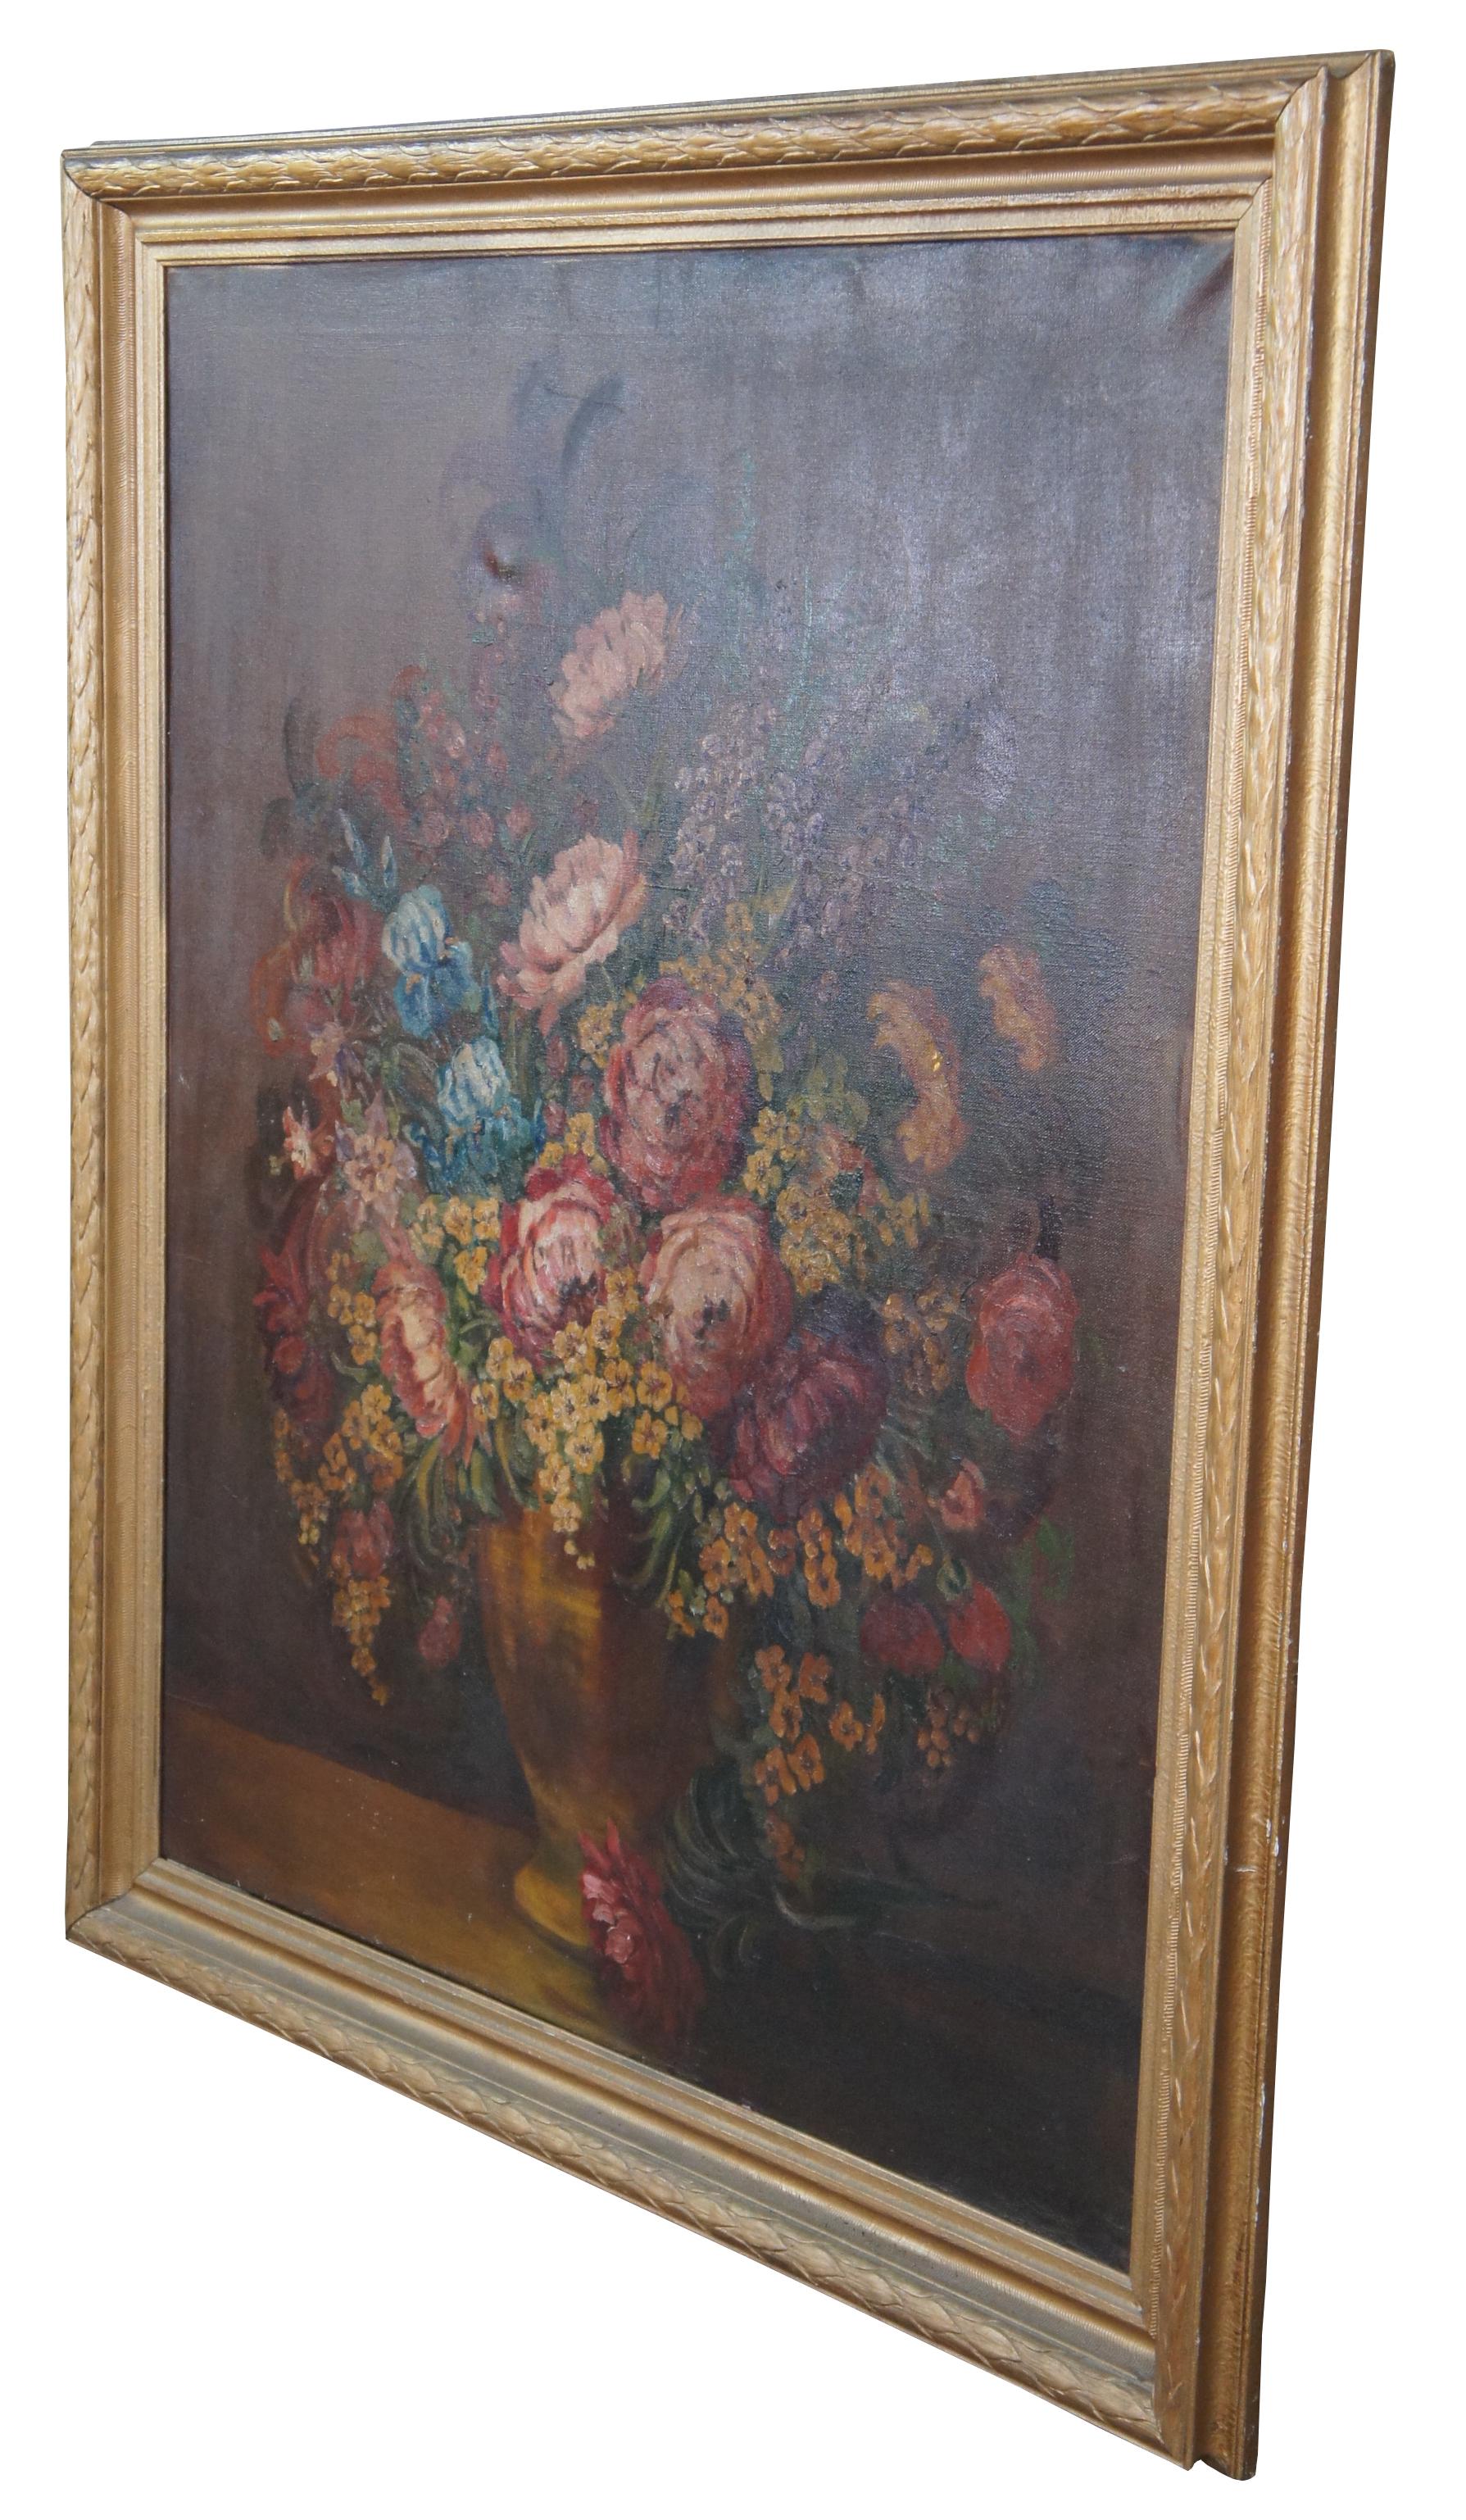 Antique early 20th century floral still life oil painting on canvas featuring a bouquet of flowers in a gold vase with French frame framed.

Measures: 46